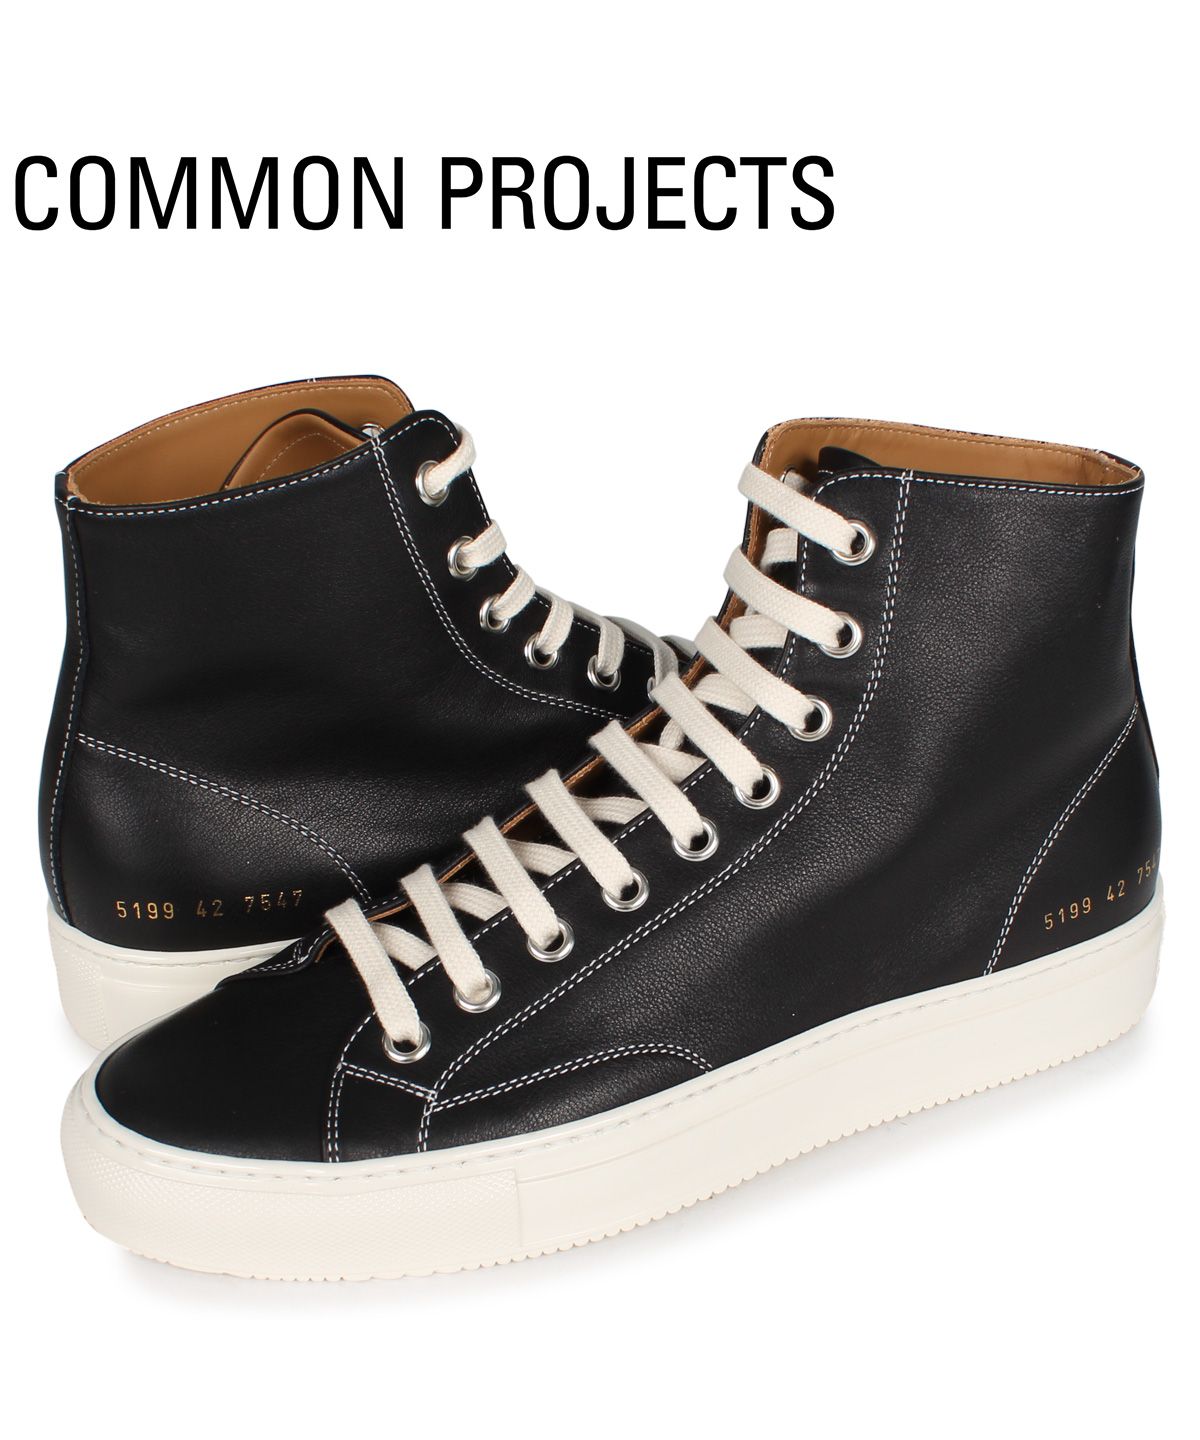 COMMON PROJECTS（コモンプロジェクト）ハイカット レザー【希少